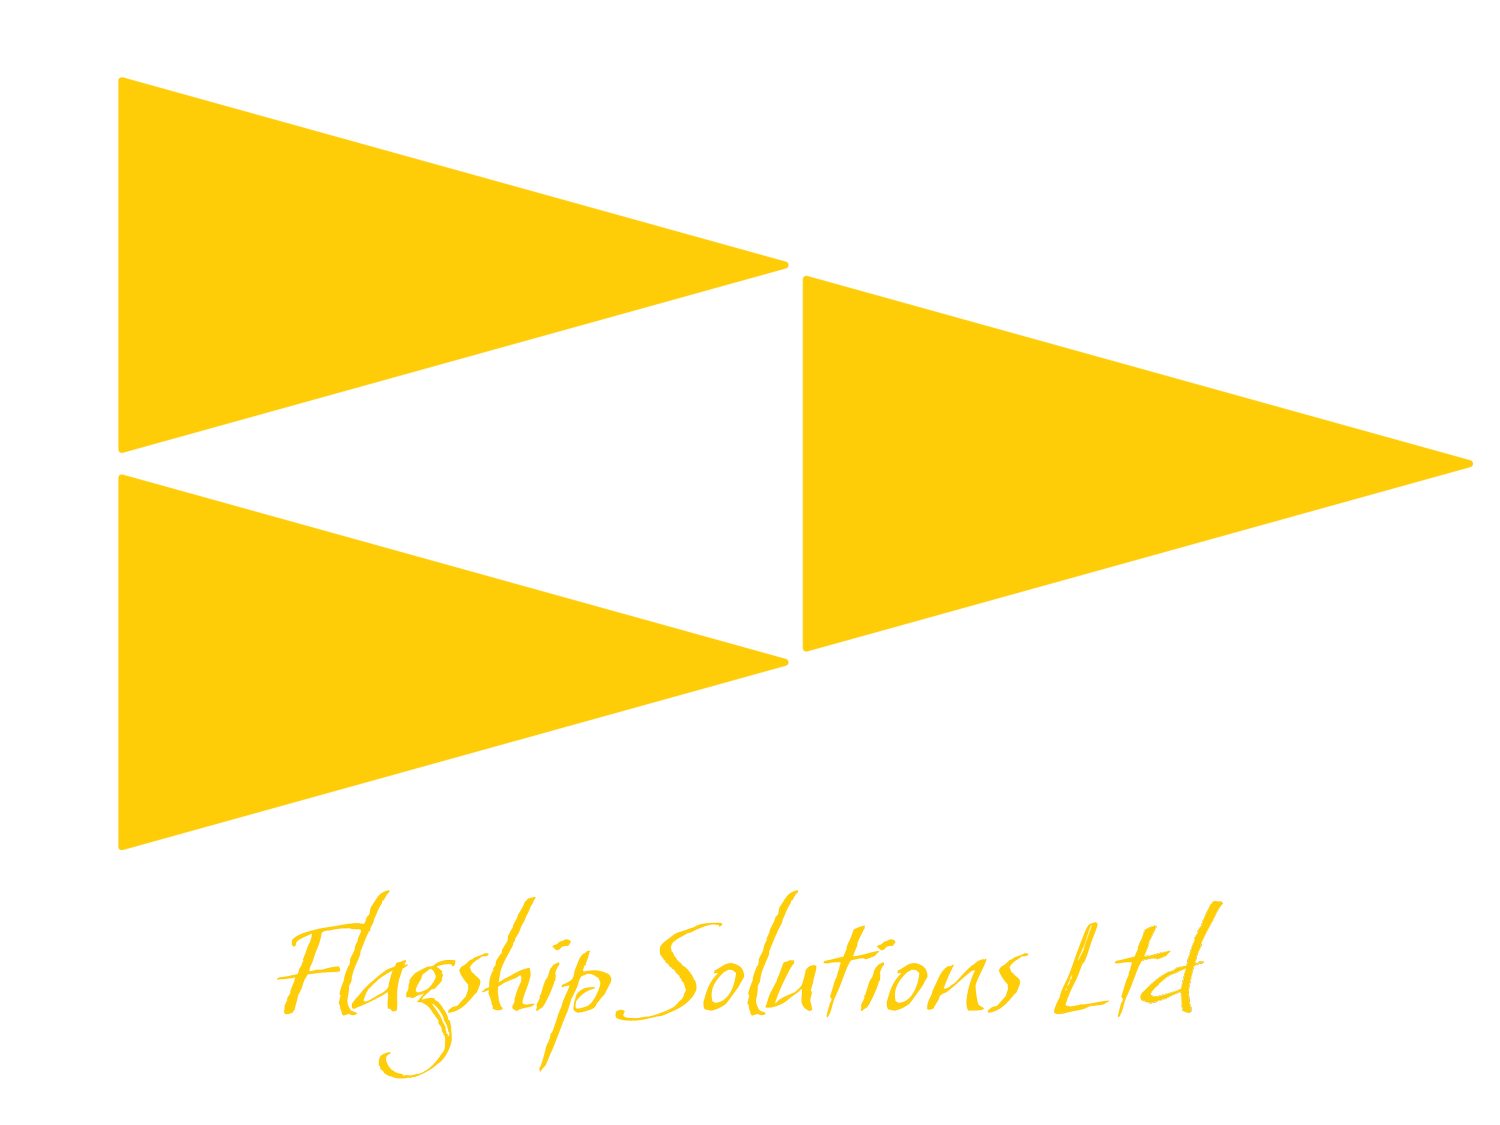 Flagship Fit-out Solutions Ltd